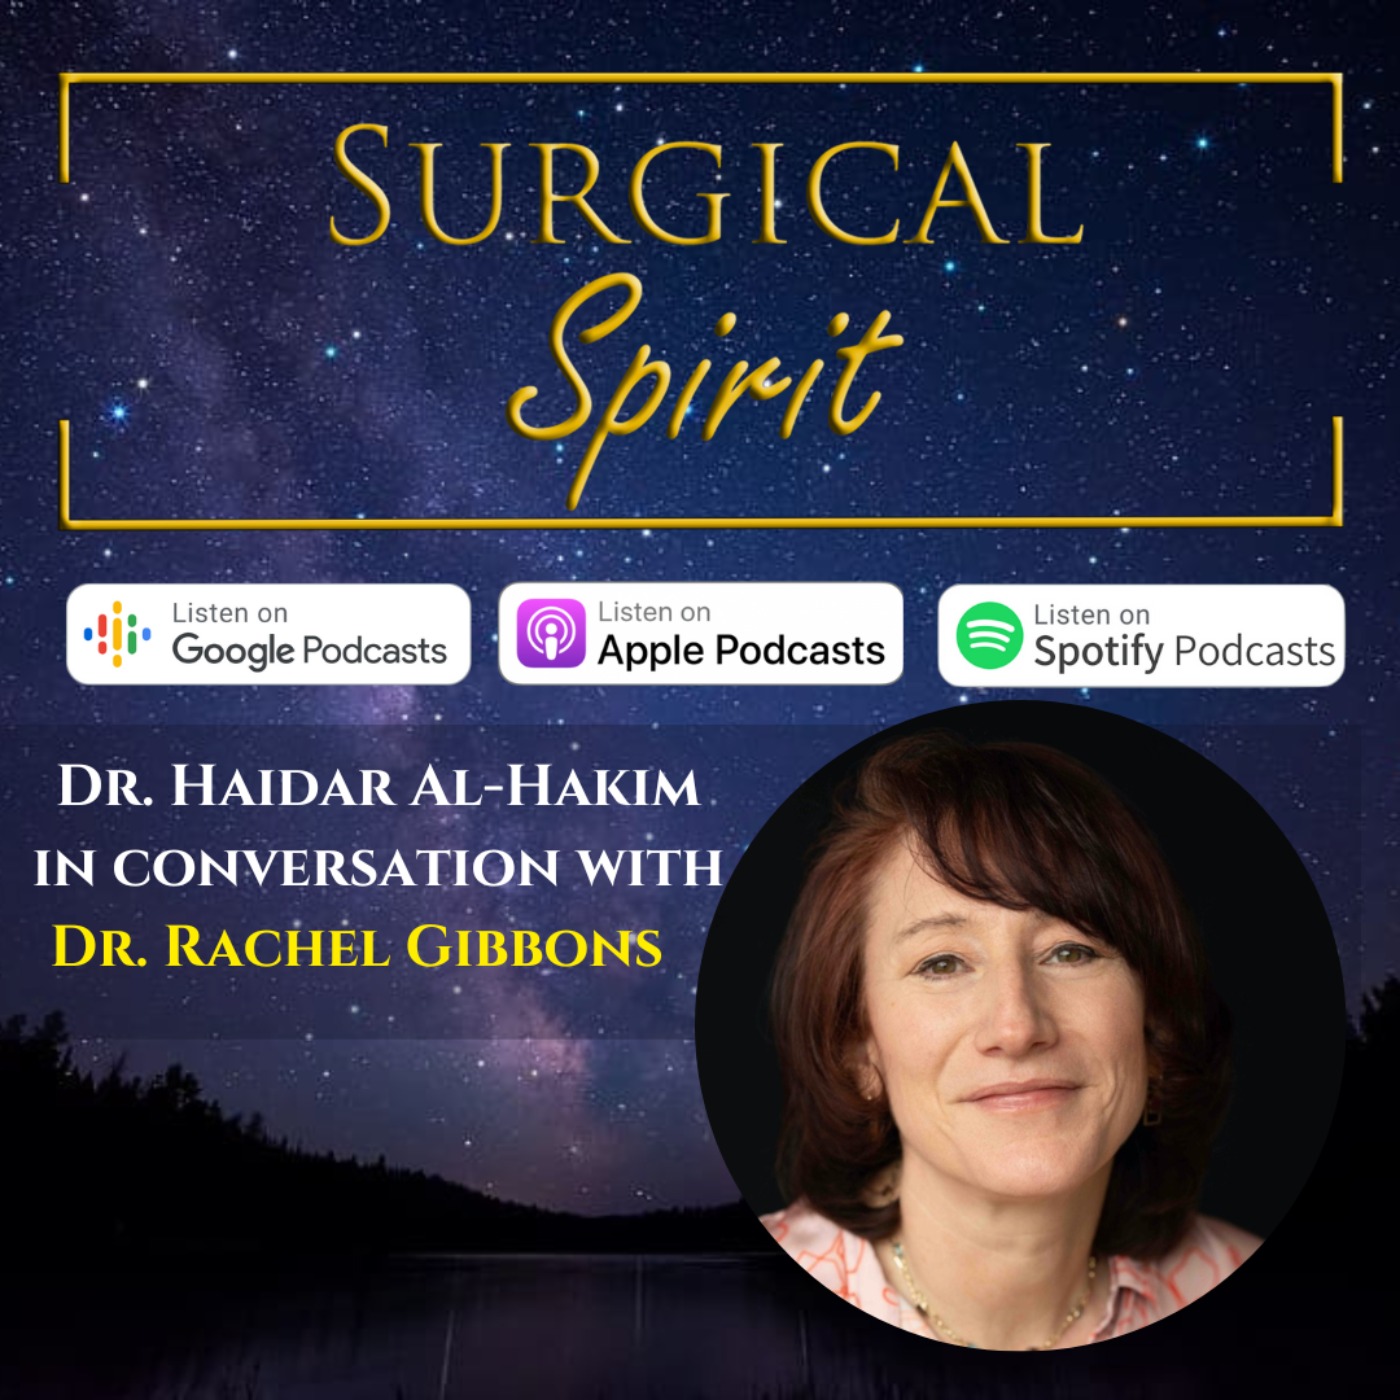 The ’truth’ and nature of Suicide, with Dr Rachel gibbons